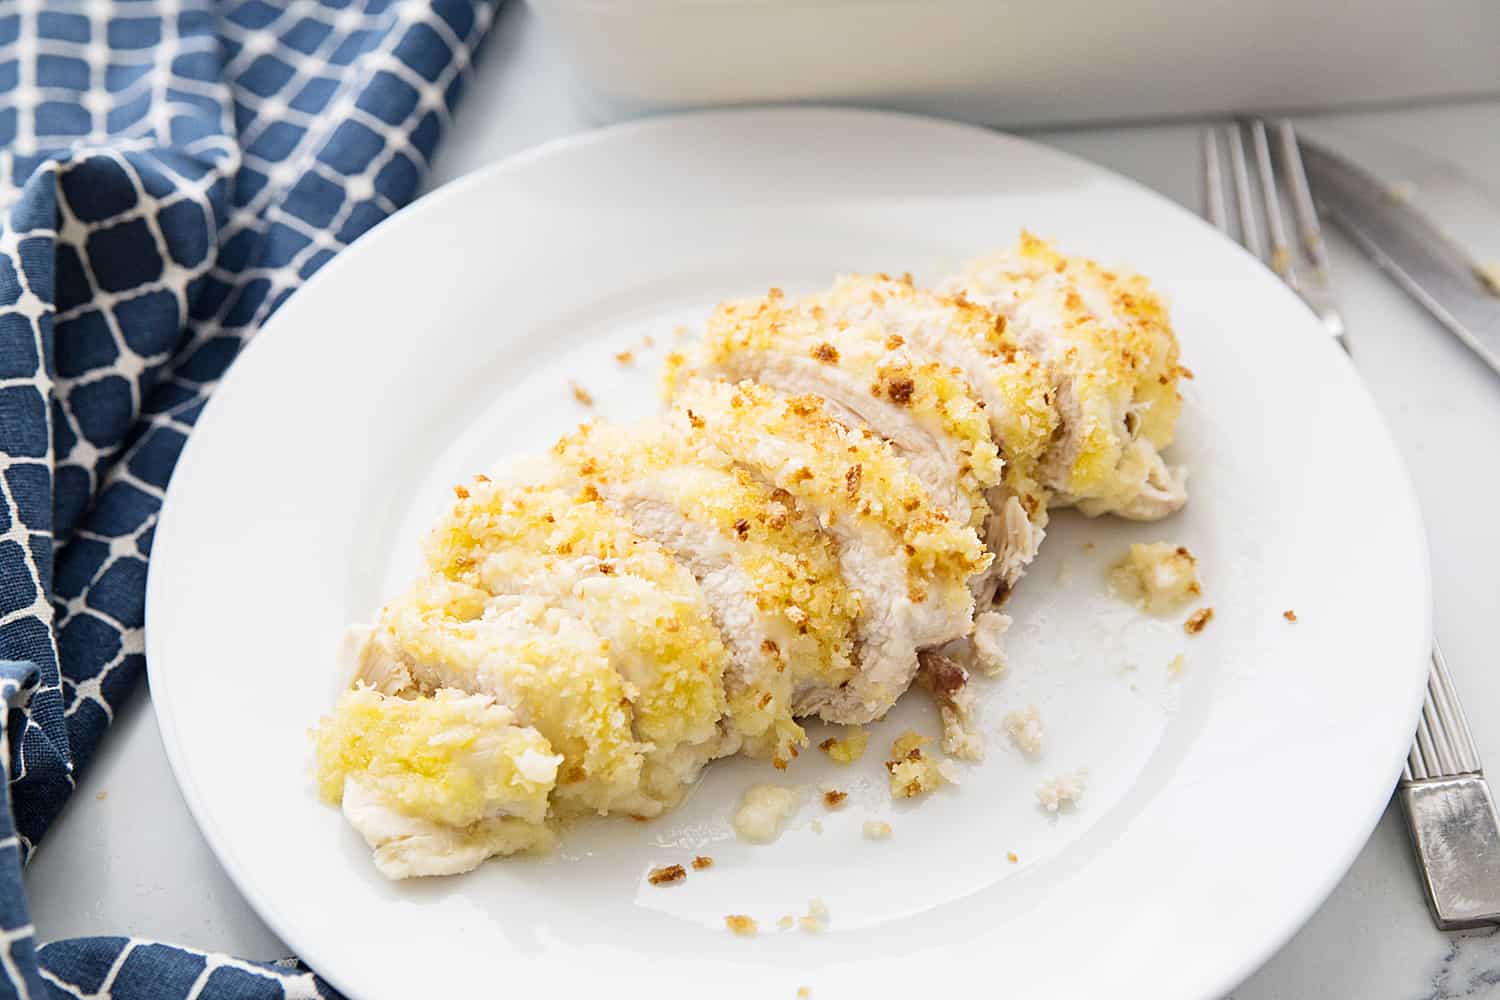 Easy Swiss Cheese Chicken - This Swiss cheese chicken recipe is an easy weeknight meal! Chicken breasts are covered in a creamy sauce and cheese and topped with crispy bread crumbs.